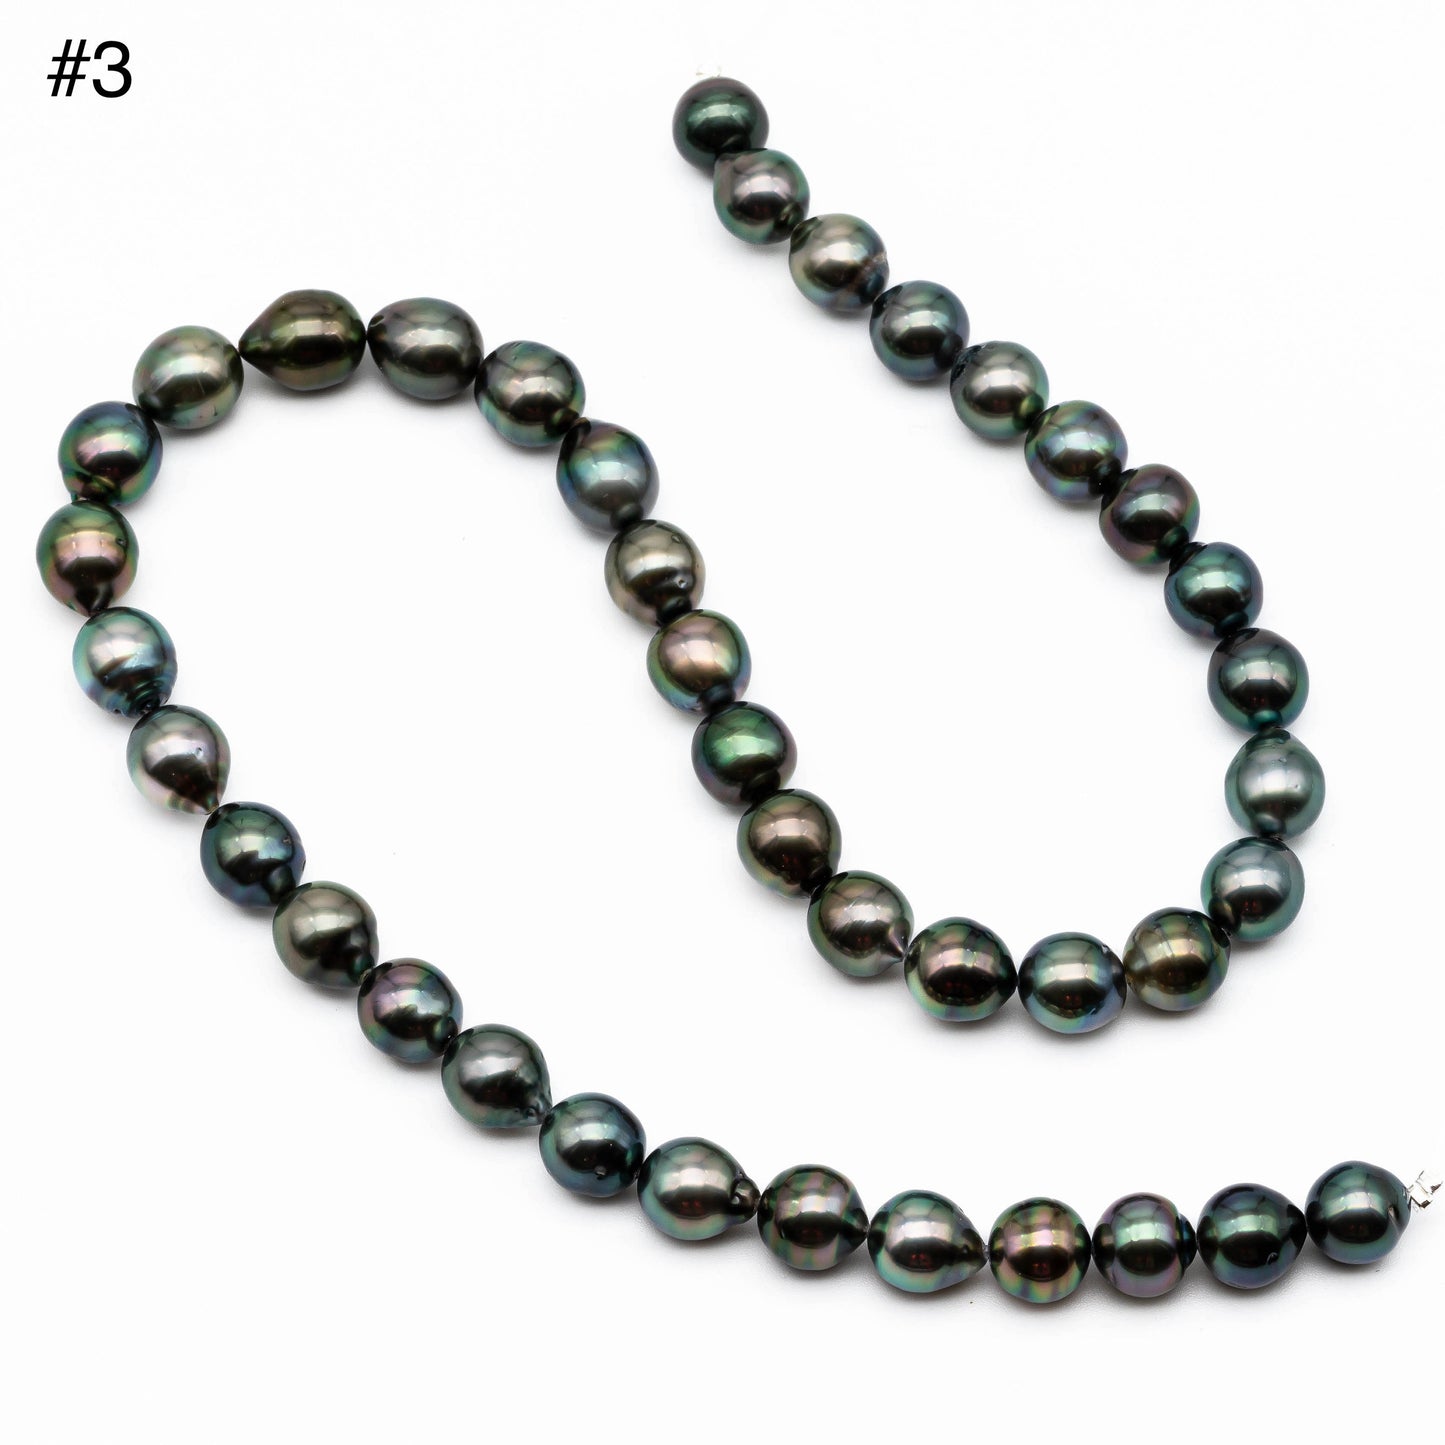 Tahitian Pearl Strand, Near Round or Drop Shape Natural Pearl Strand with High Luster, For Jewelry Making, 9-9.5mm, SKU # 1044TH